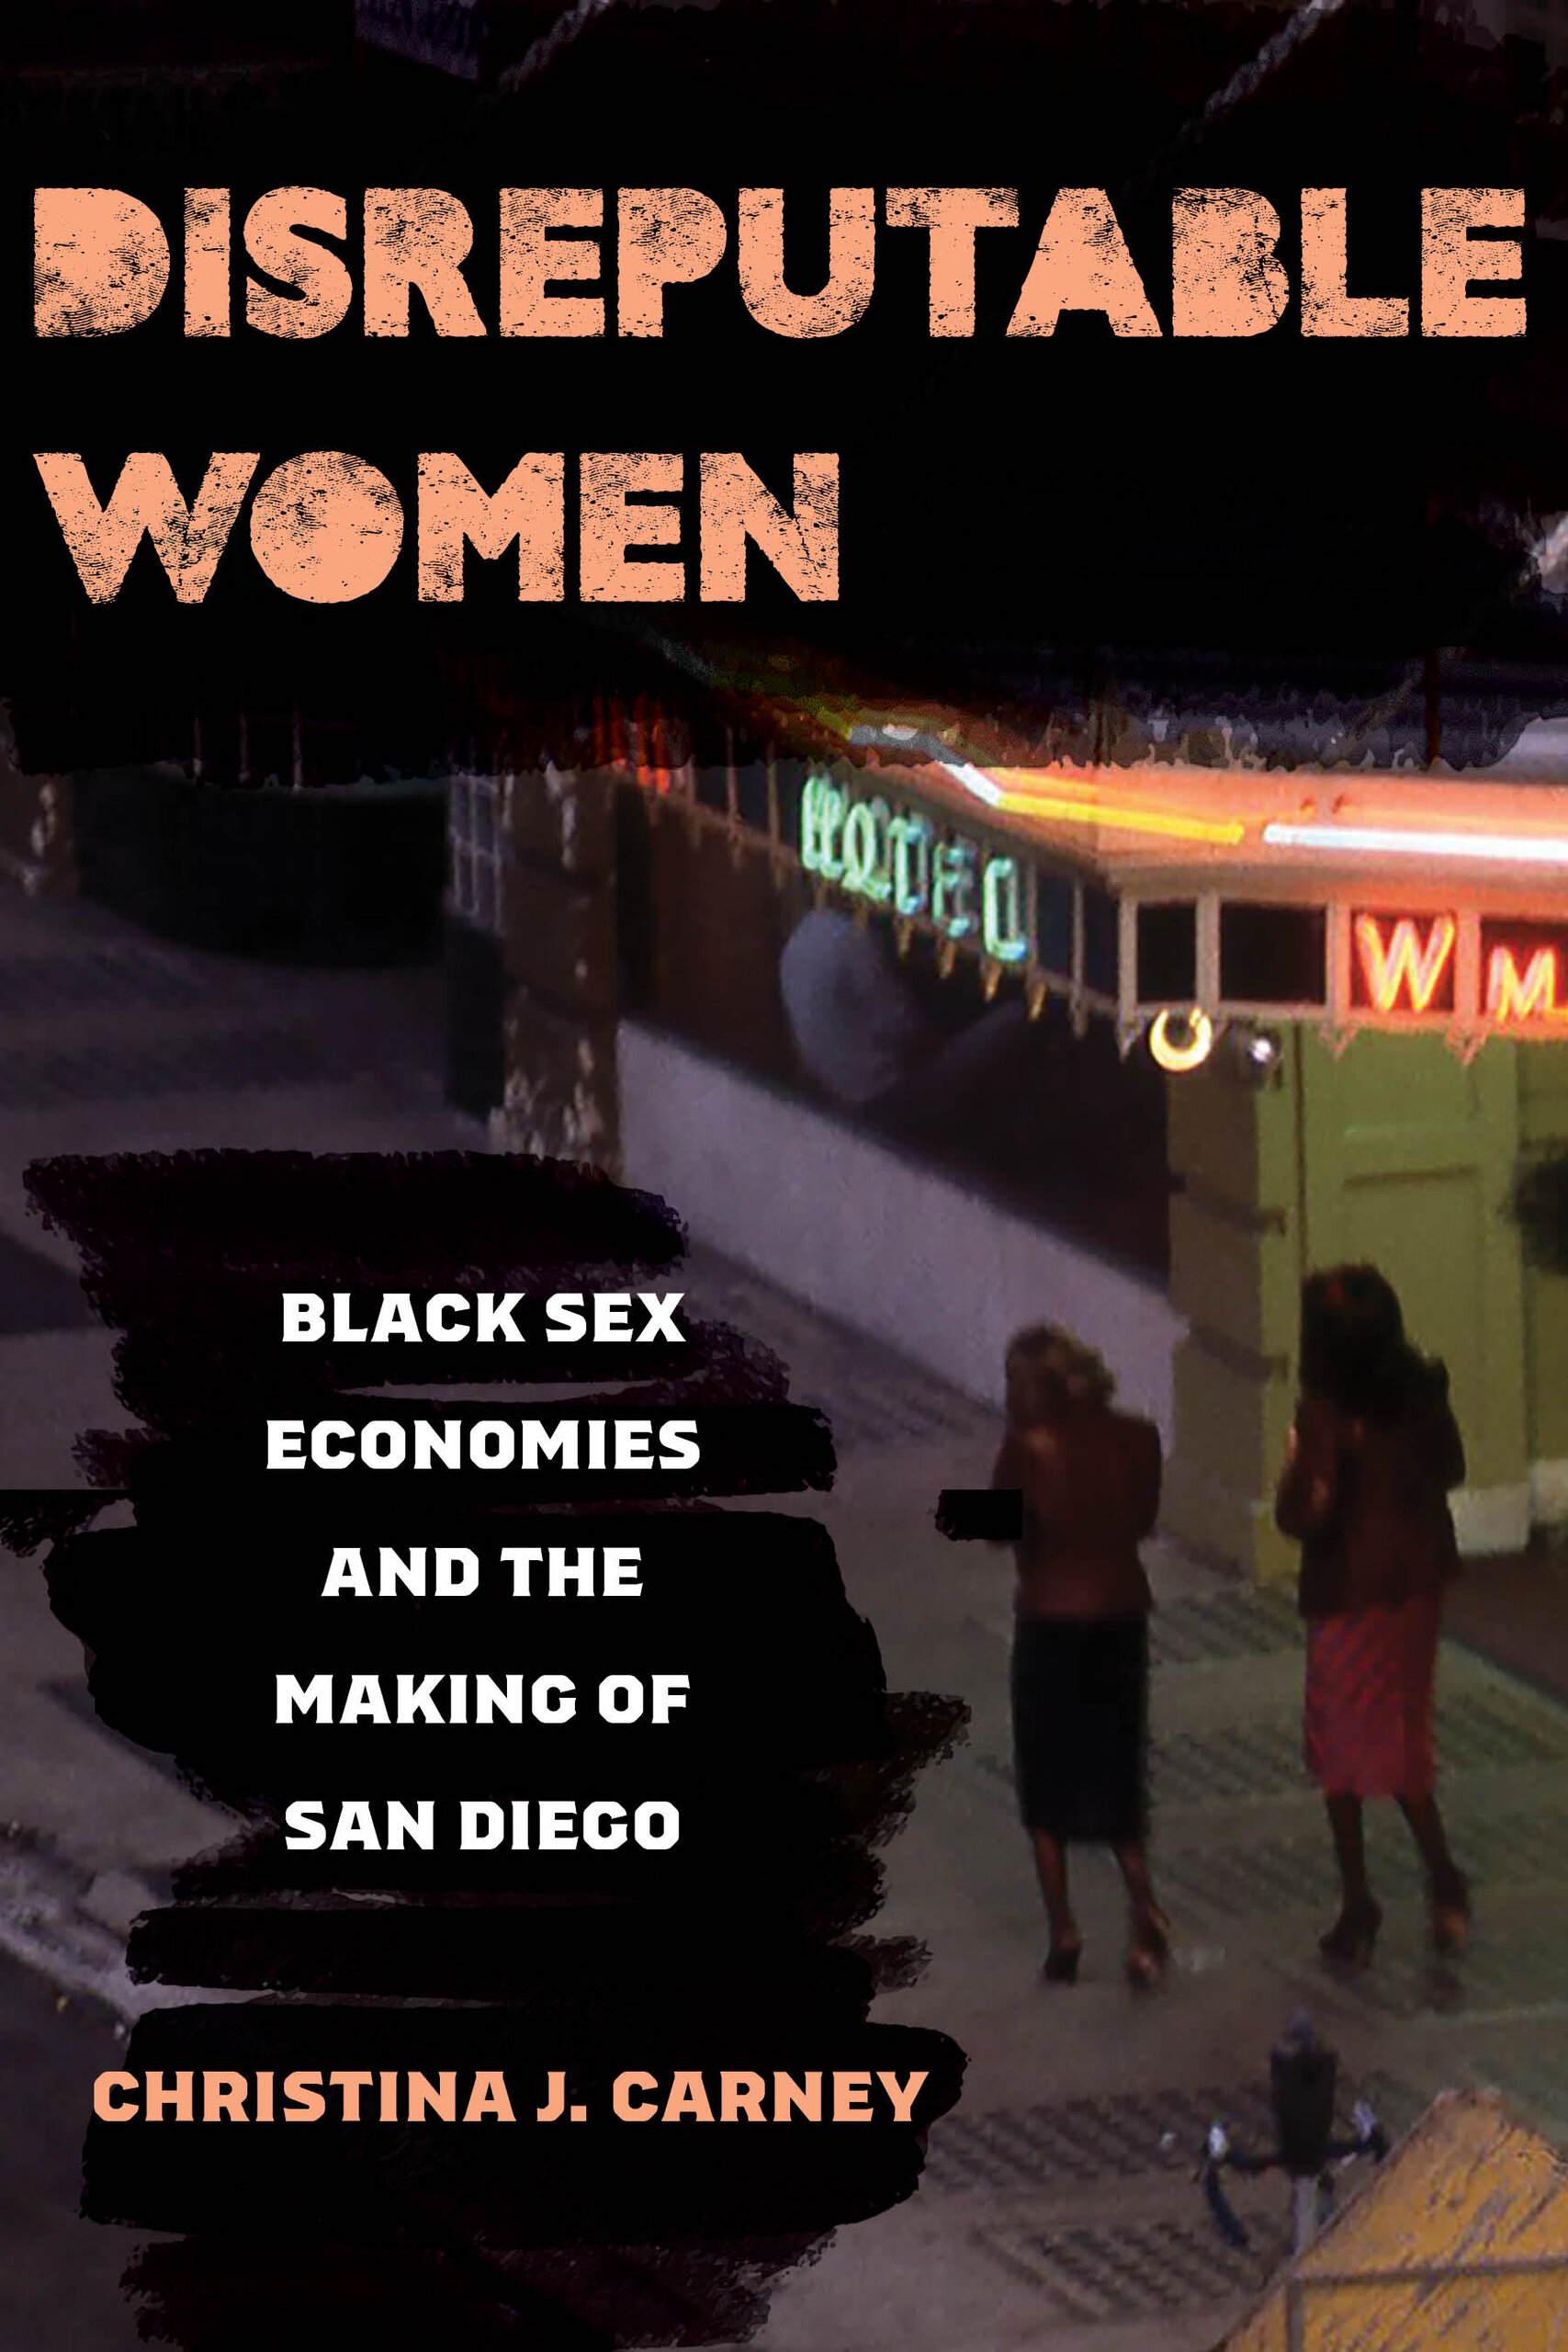 Book Cover for Disreputable Women: Black Sex Economies and the Making of San Diego. Two women are walking down street in a urban US city. 